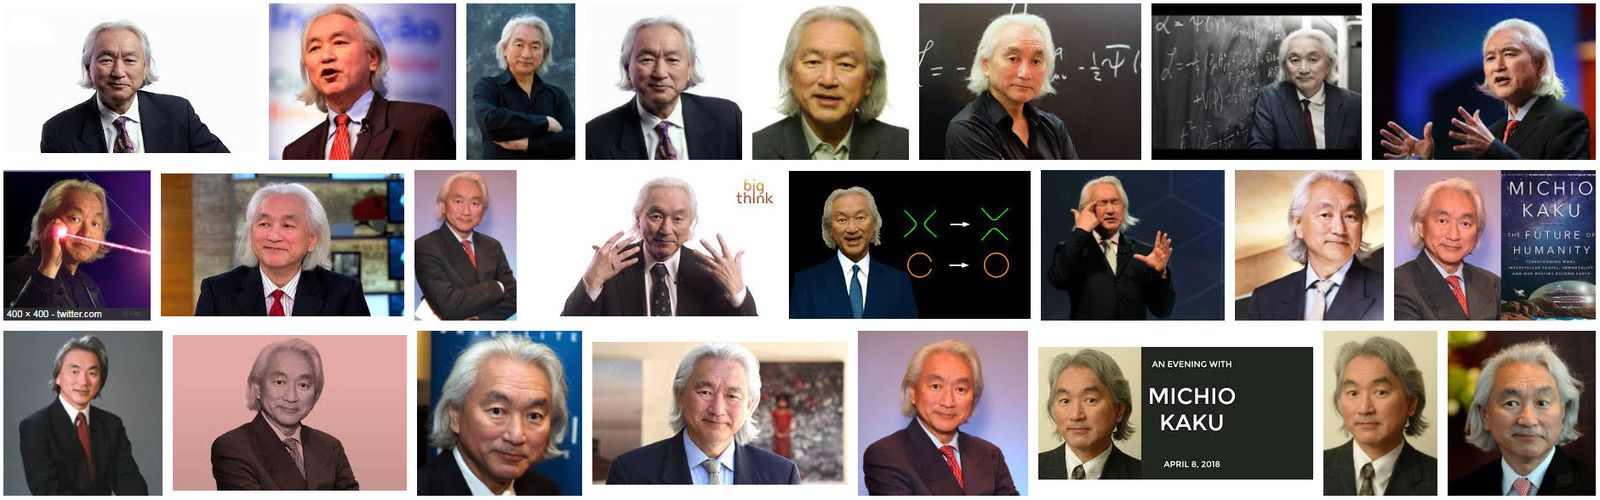 Michio Kaku born at San Jose, California United States Residence New York City United States Nationality American Alma mater	Harvard University (B.A., 1968) University of California, Berkeley (Ph.D., 1972) Known for	String field theory Physics of the Impossible Physics of the Future The Future of the Mind Spouse(s)	Shizue Kaku Children	2 Awards	Klopsteg Memorial Award (2008) Scientific career Fields	Theoretical physics Institutions	City University of New York New York University Institute for Advanced Study Doctoral advisor	Stanley Mandelstam Website	MKaku.org Michio Kaku (/ˈmiːtʃioʊ ˈkɑːkuː/; born 1947) is an American theoretical physicist, futurist, and popularizer of science. He is professor of theoretical physics in the City College of New York and CUNY Graduate Center. Kaku has written several books about physics and related topics, has made frequent appearances on radio, television, and film, and writes online blogs and articles